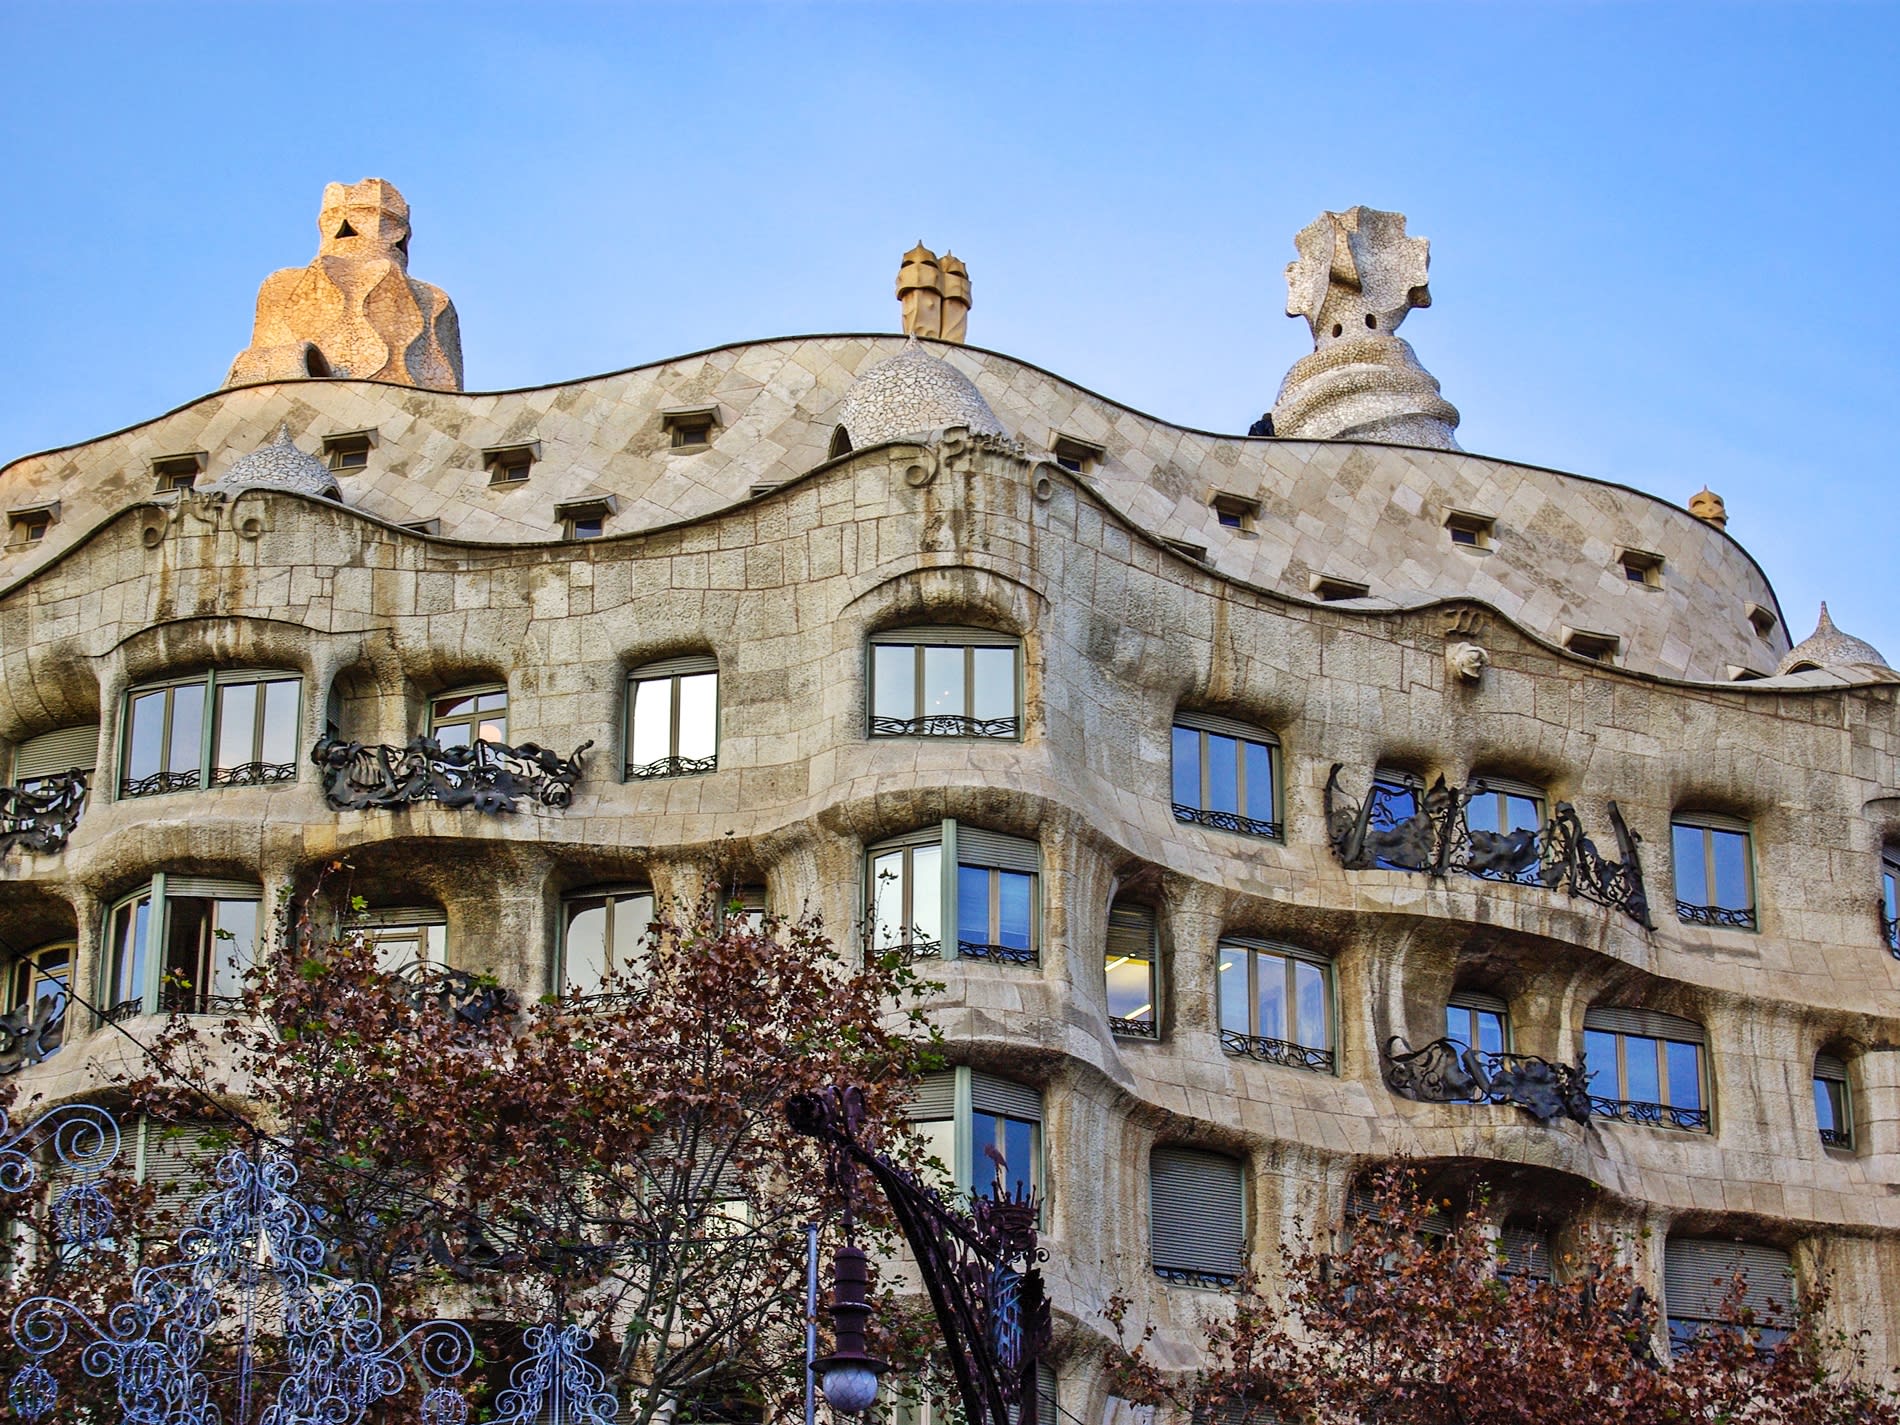 Morning Barcelona Highlights Afternoon Gaudi Combo Tour tours, fun things to do in